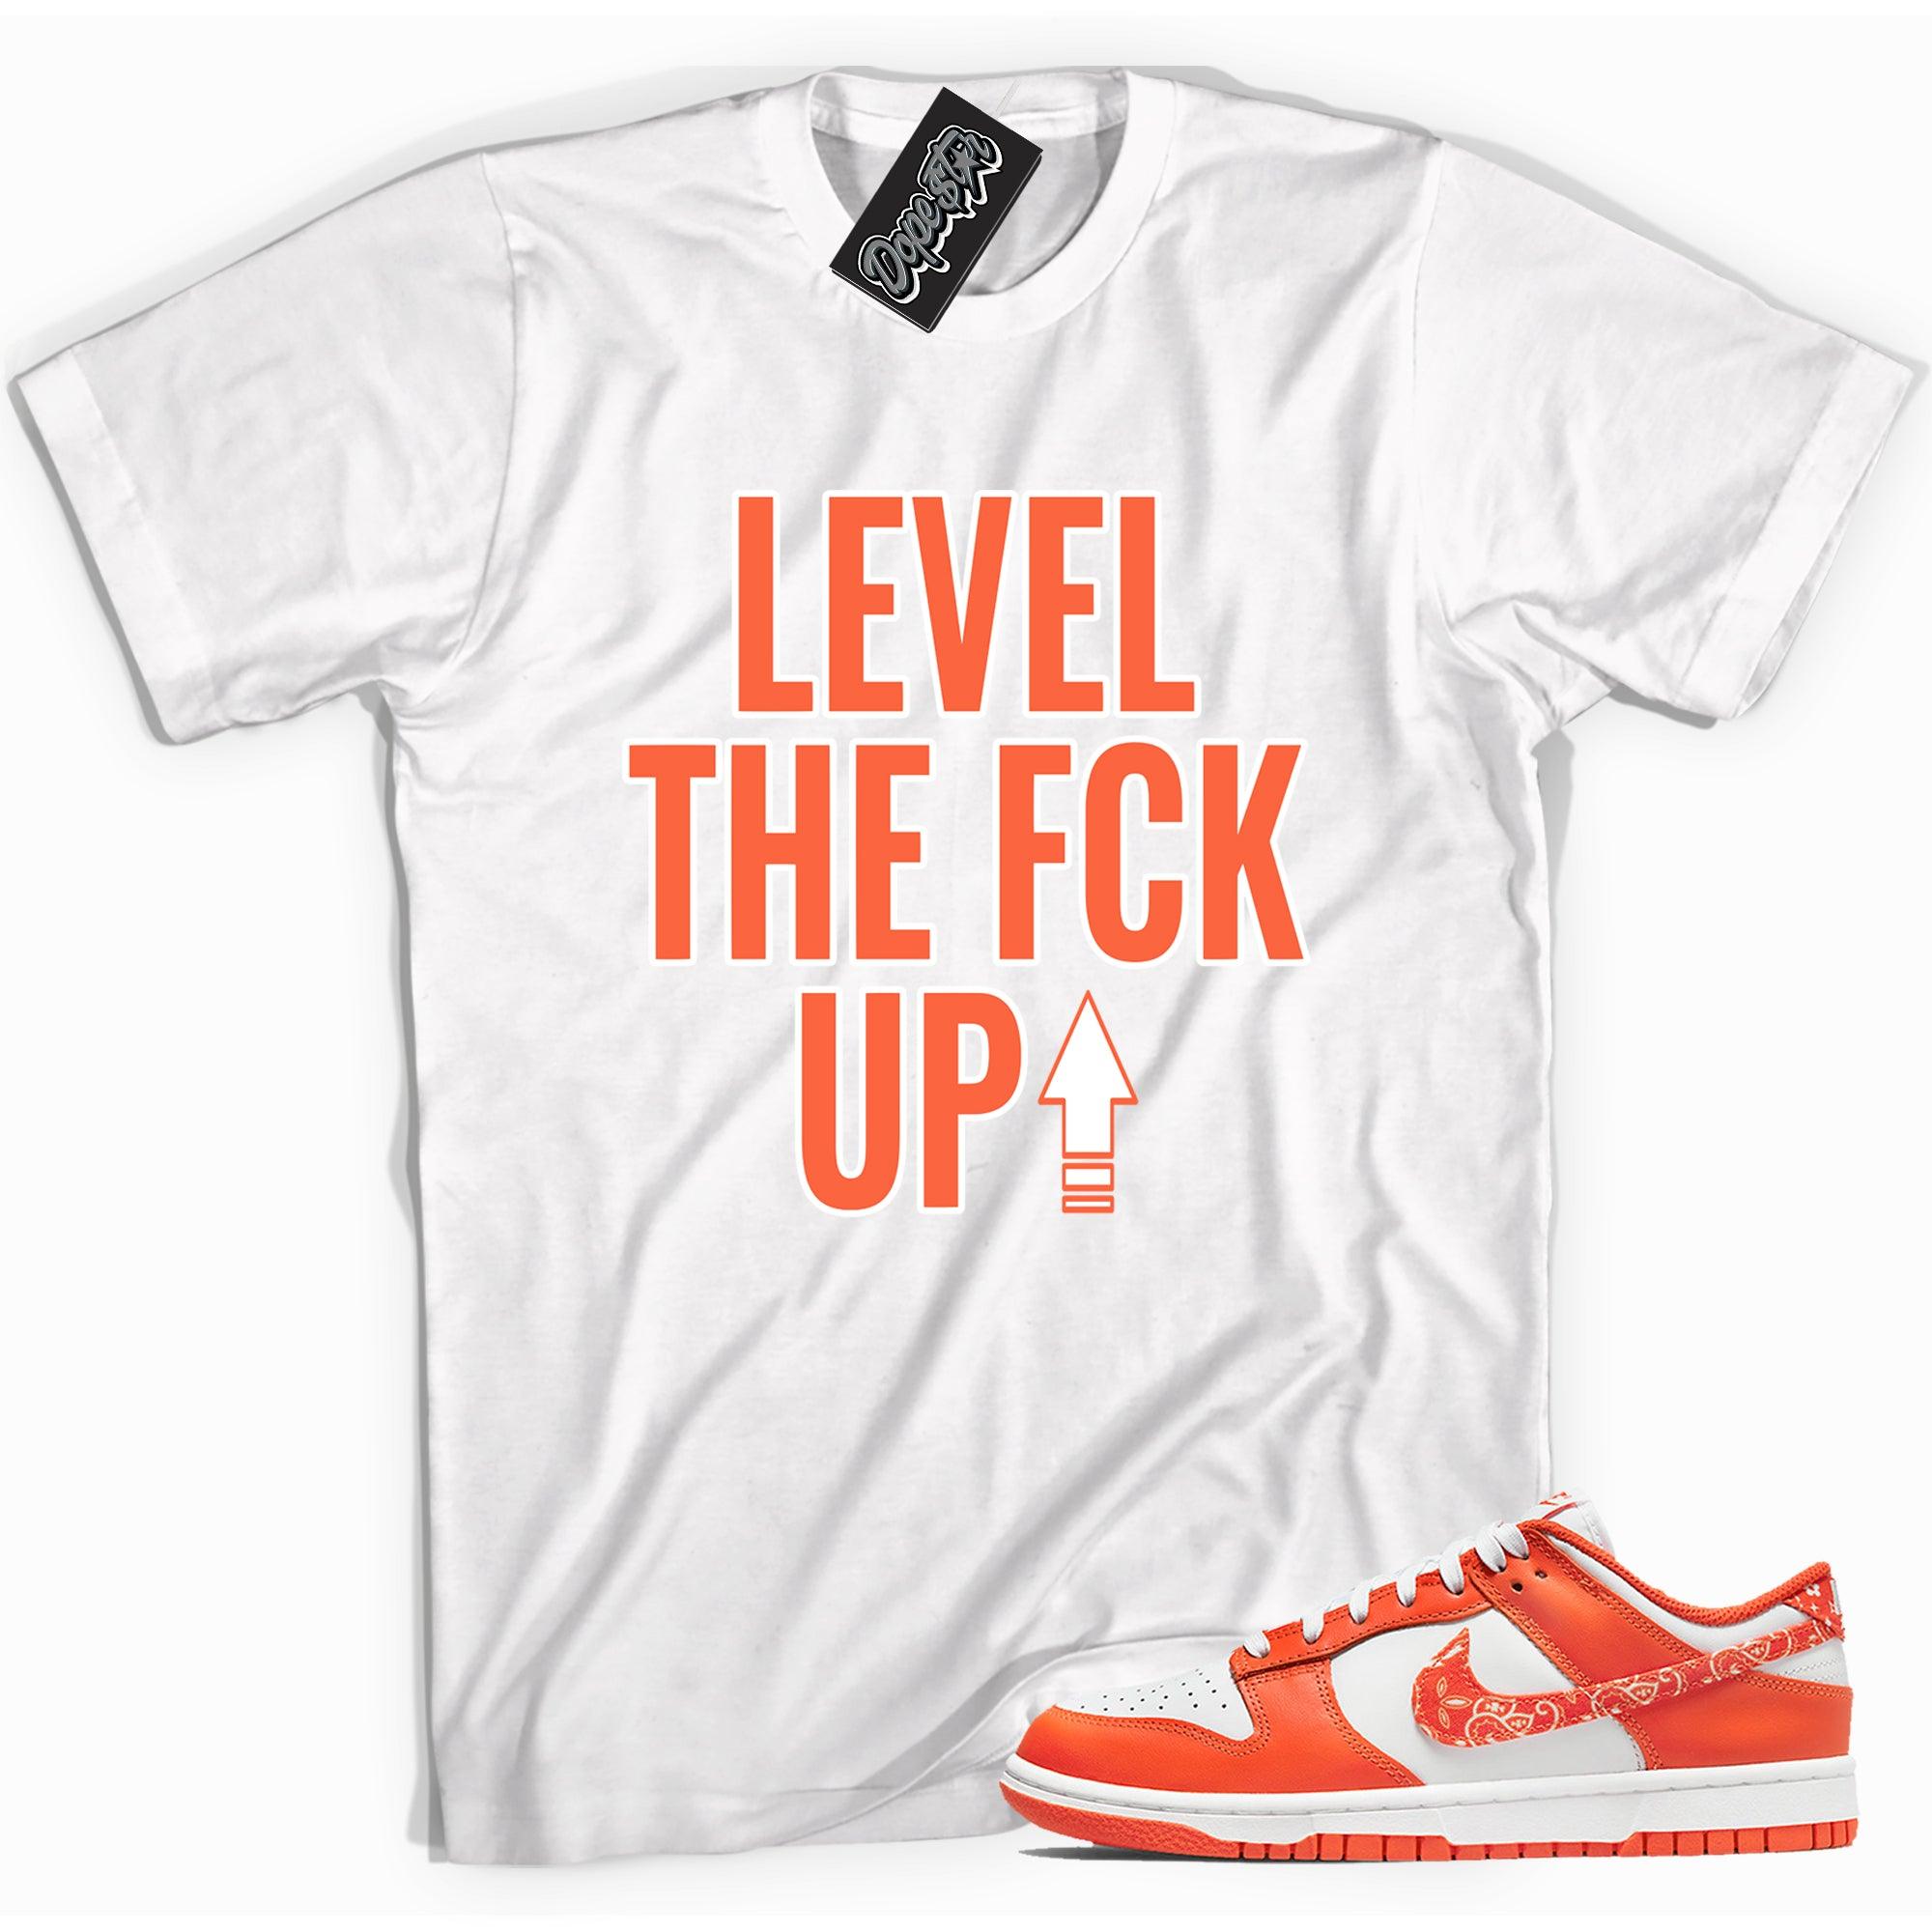 Cool white graphic tee with 'level up' print, that perfectly matches Nike Dunk Low Essential Paisley Pack Orange sneakers.